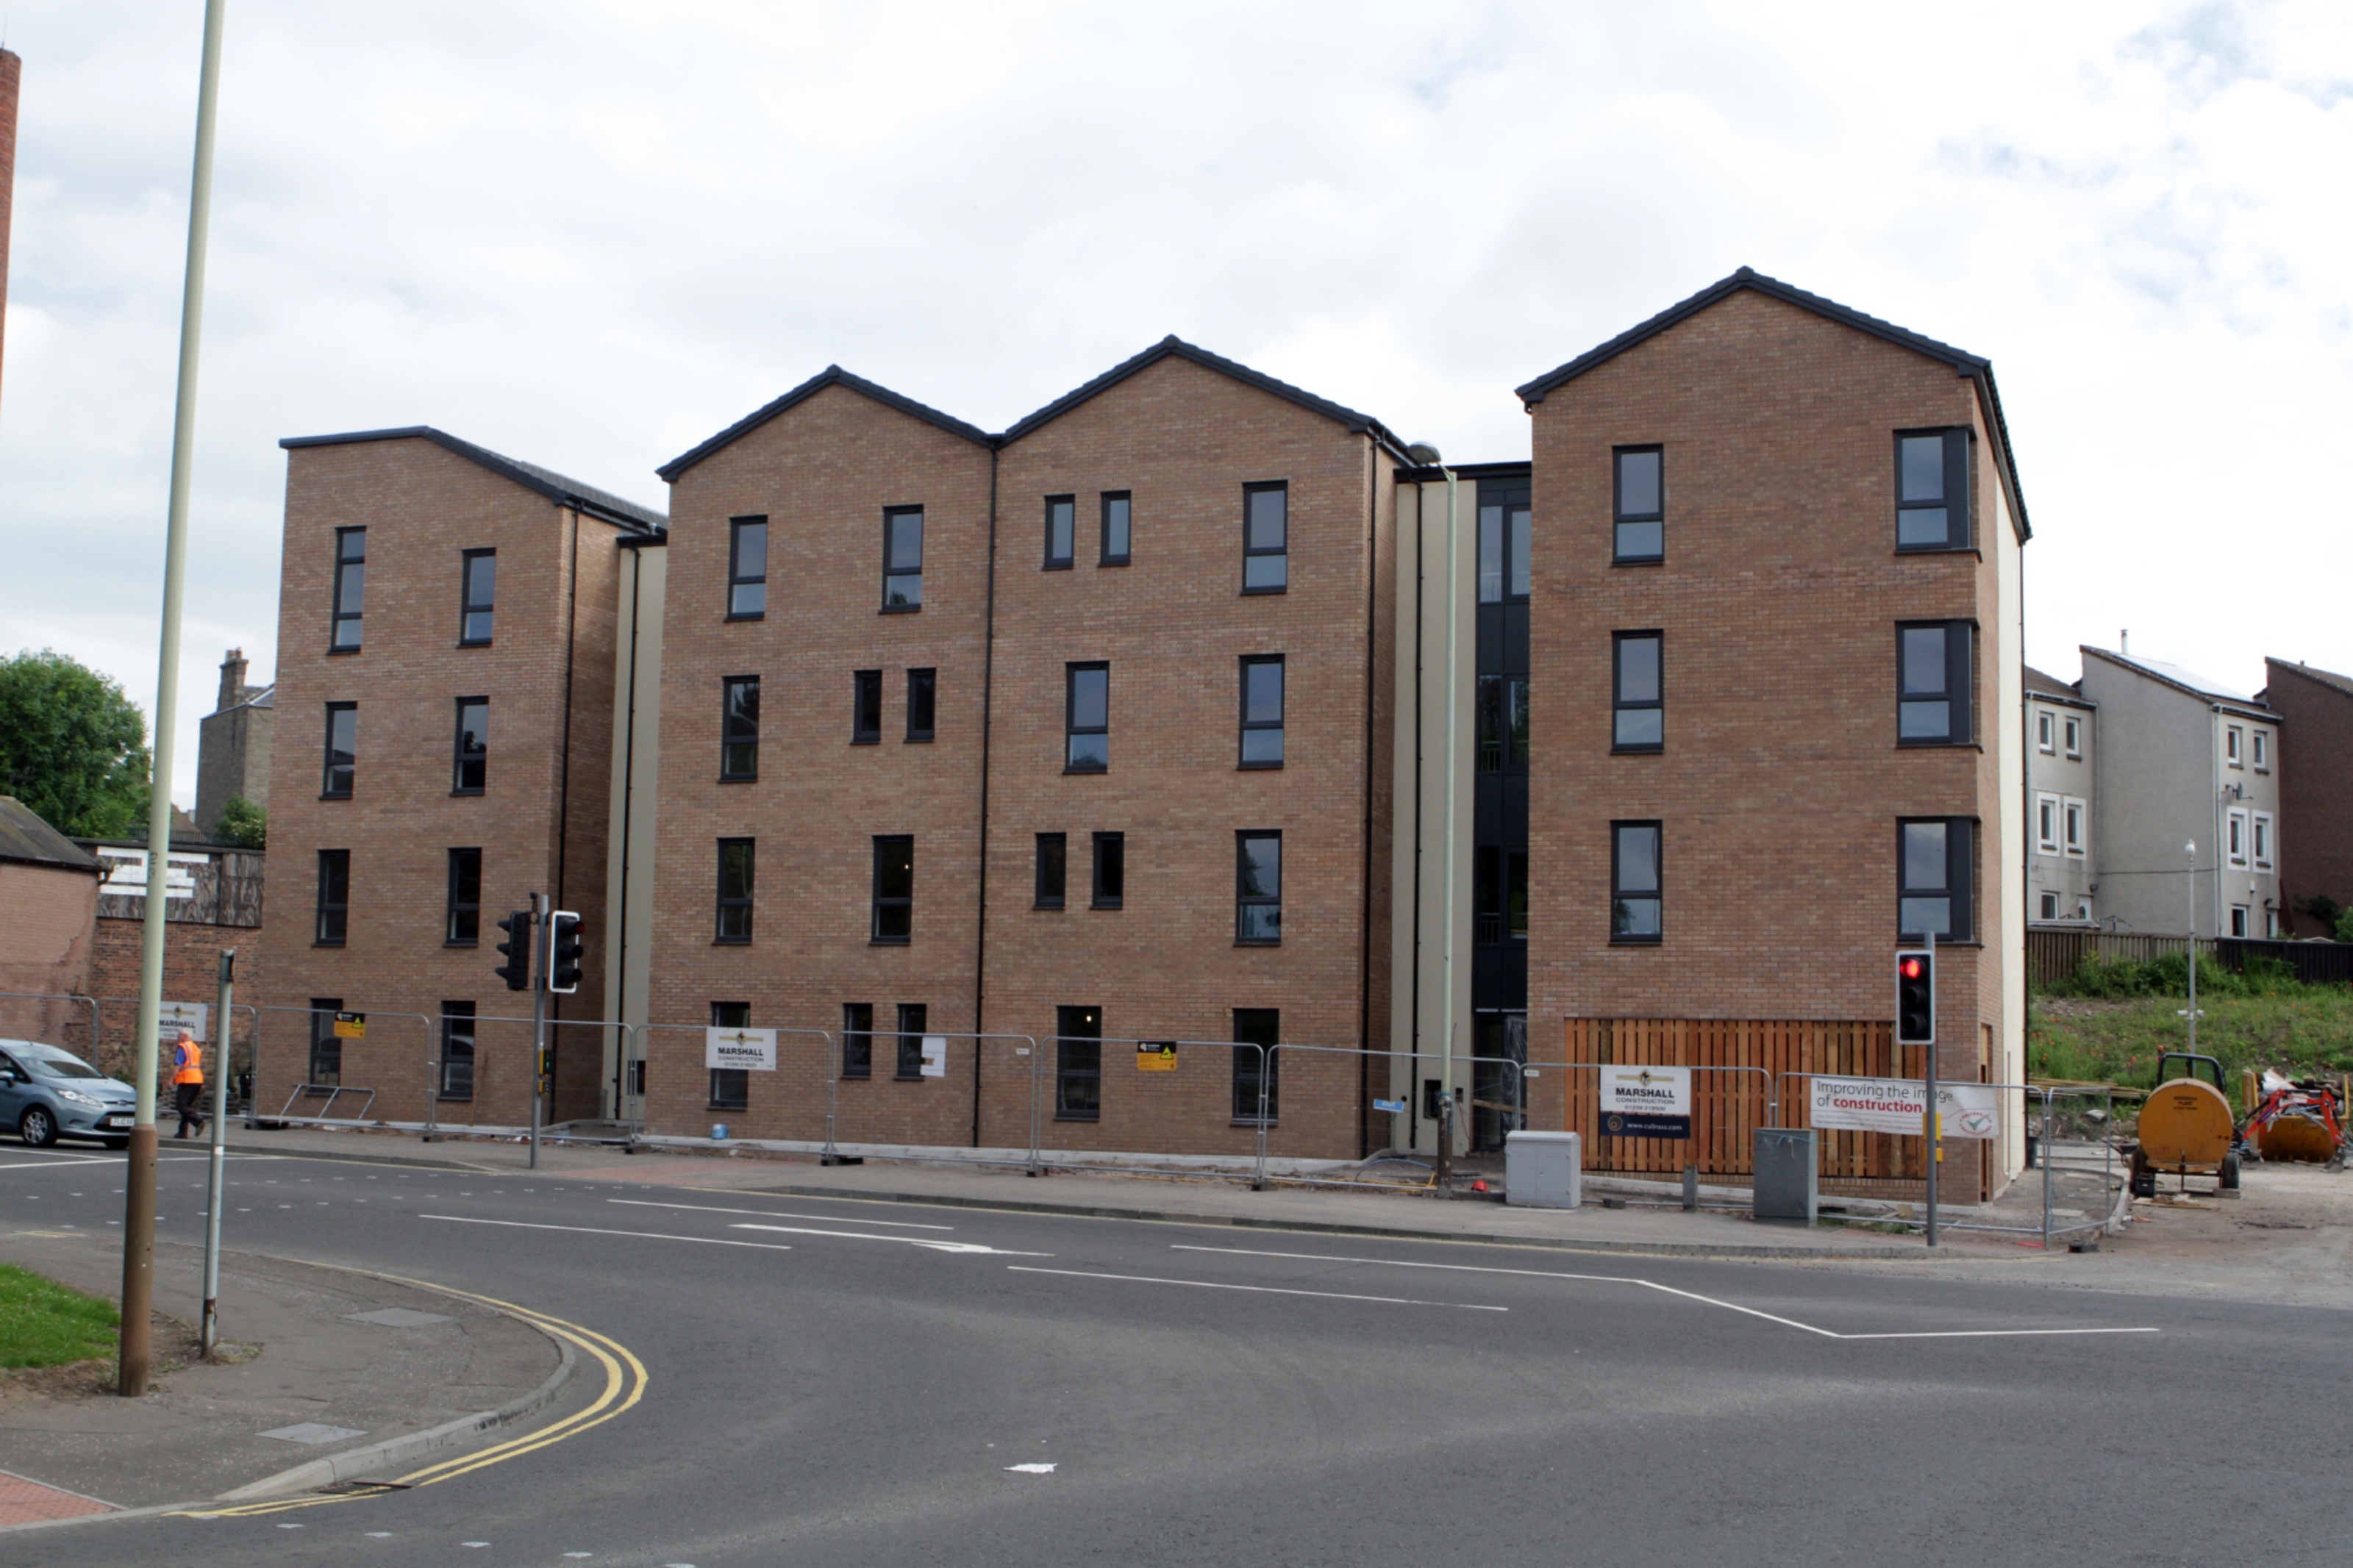 New build housing for Hillcrest and Northern Housing Association Dens Road, Dundee.